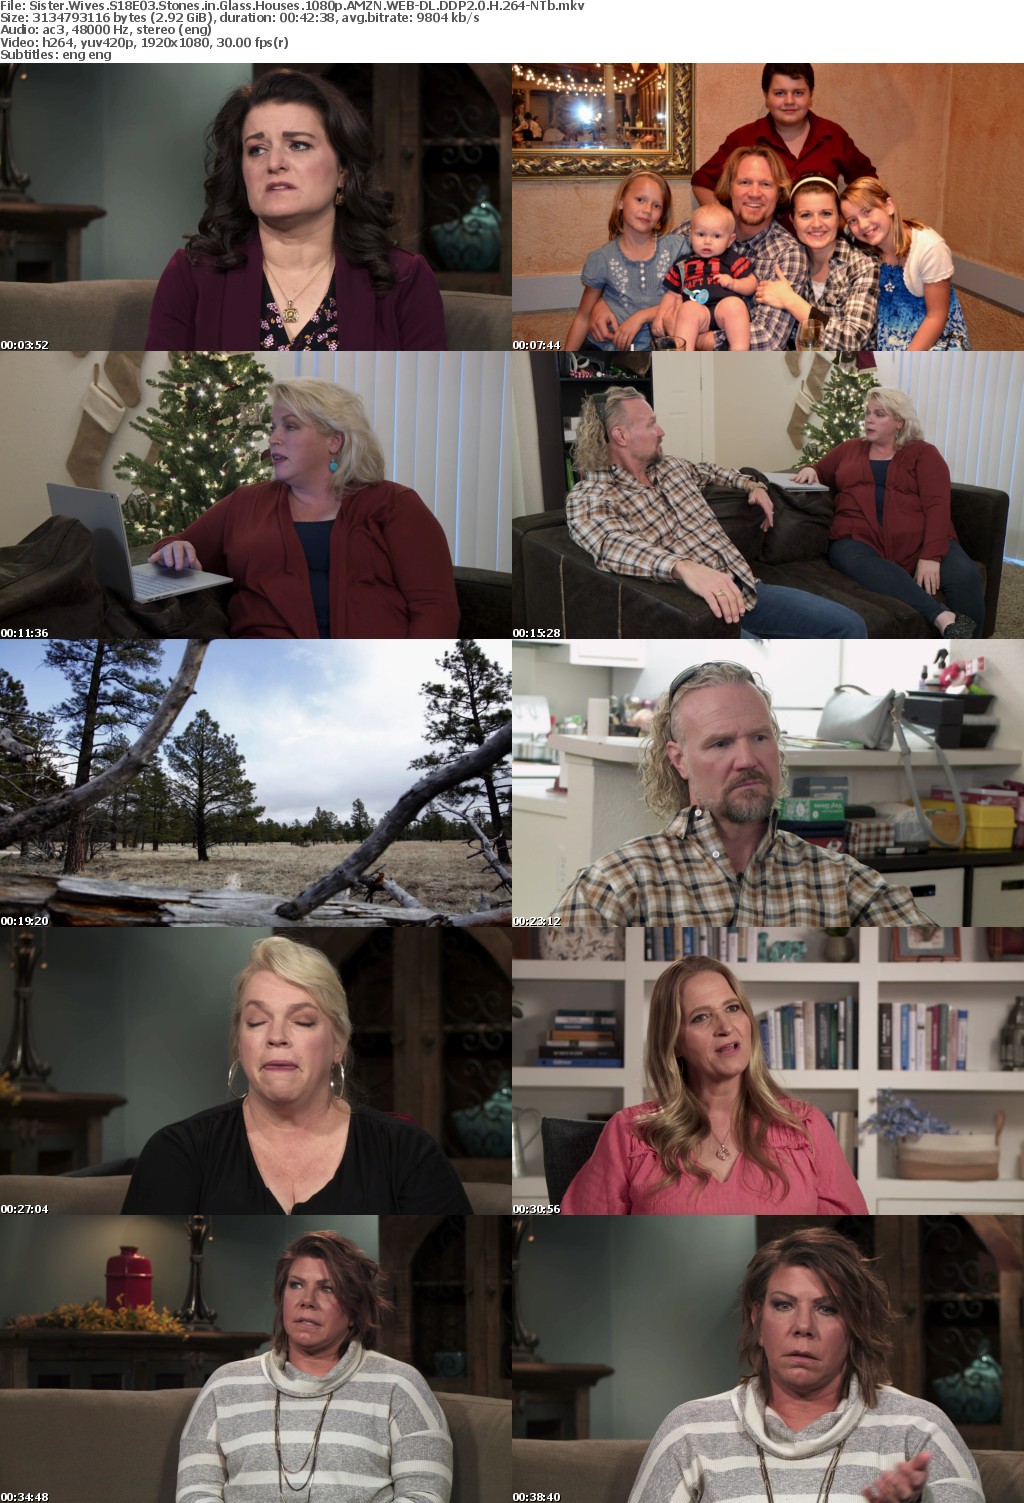 Sister Wives S18E03 Stones in Glass Houses 1080p AMZN WEB-DL DDP2 0 H 264-NTb